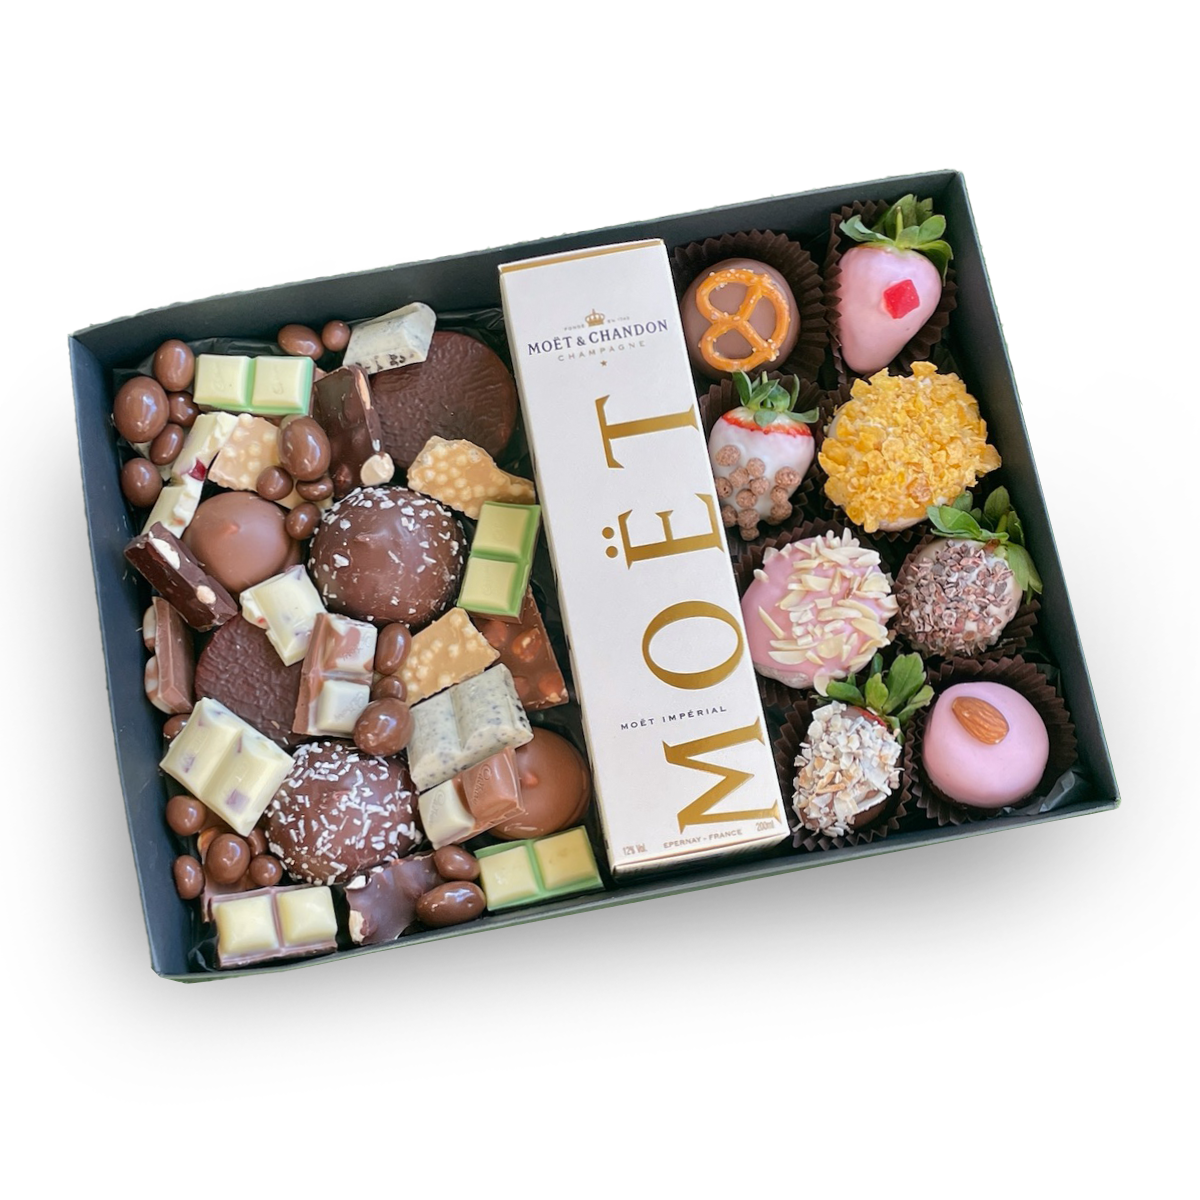 gift hamper, donut delivery, chocolate and moet, champagne and chocolate hamper